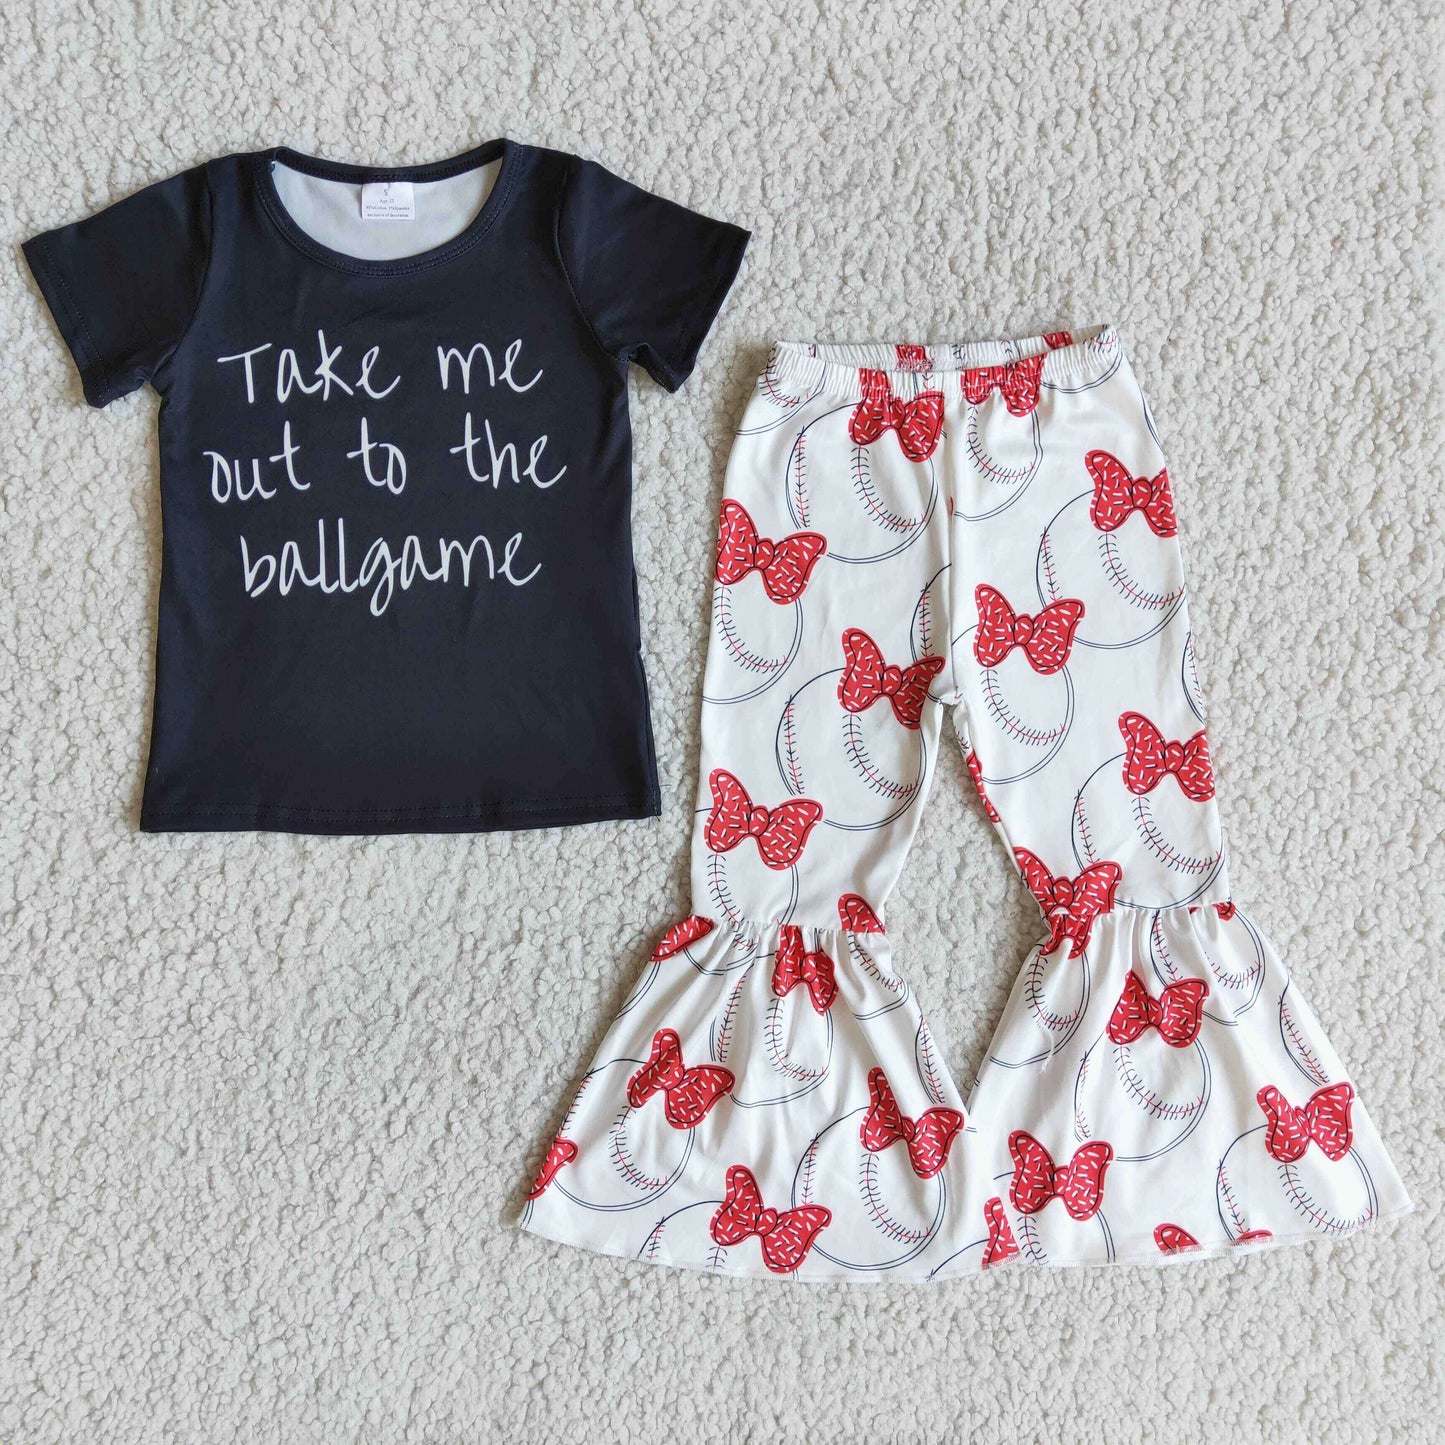 Take me to the ballgame shirt bell bottom pants girls boutique outfits